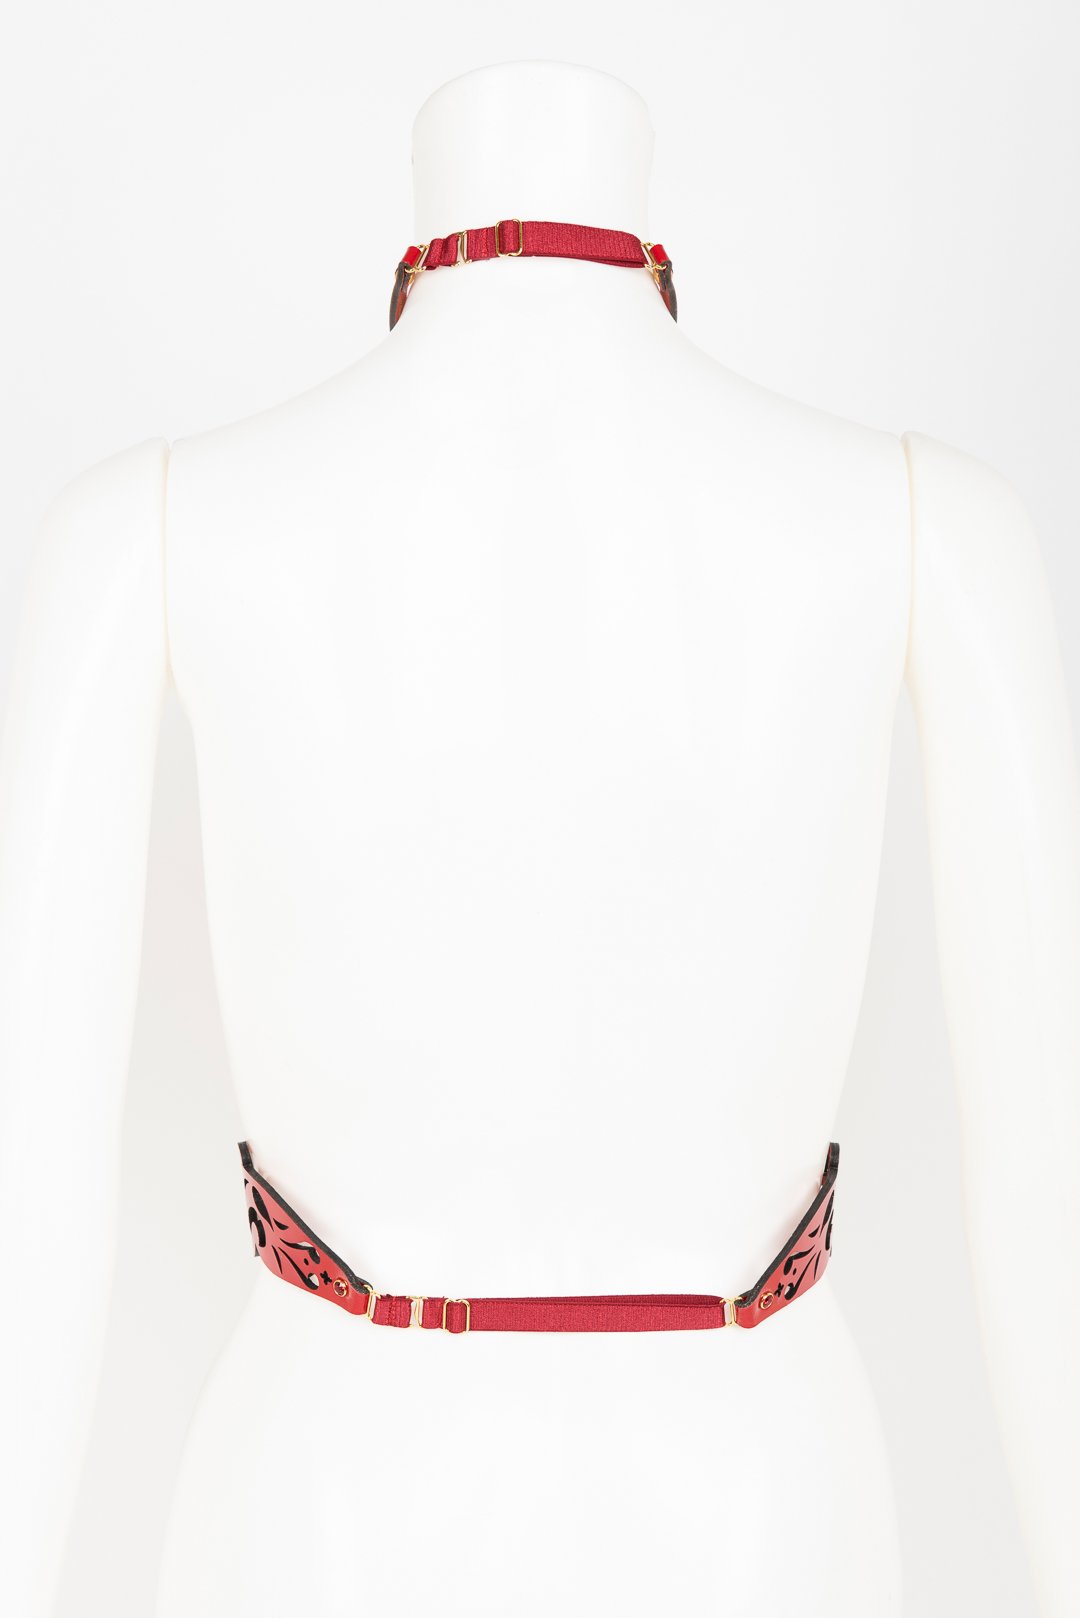  Patent Leather Harness with Crystal Rivets Buy Online at Fraulein Kink